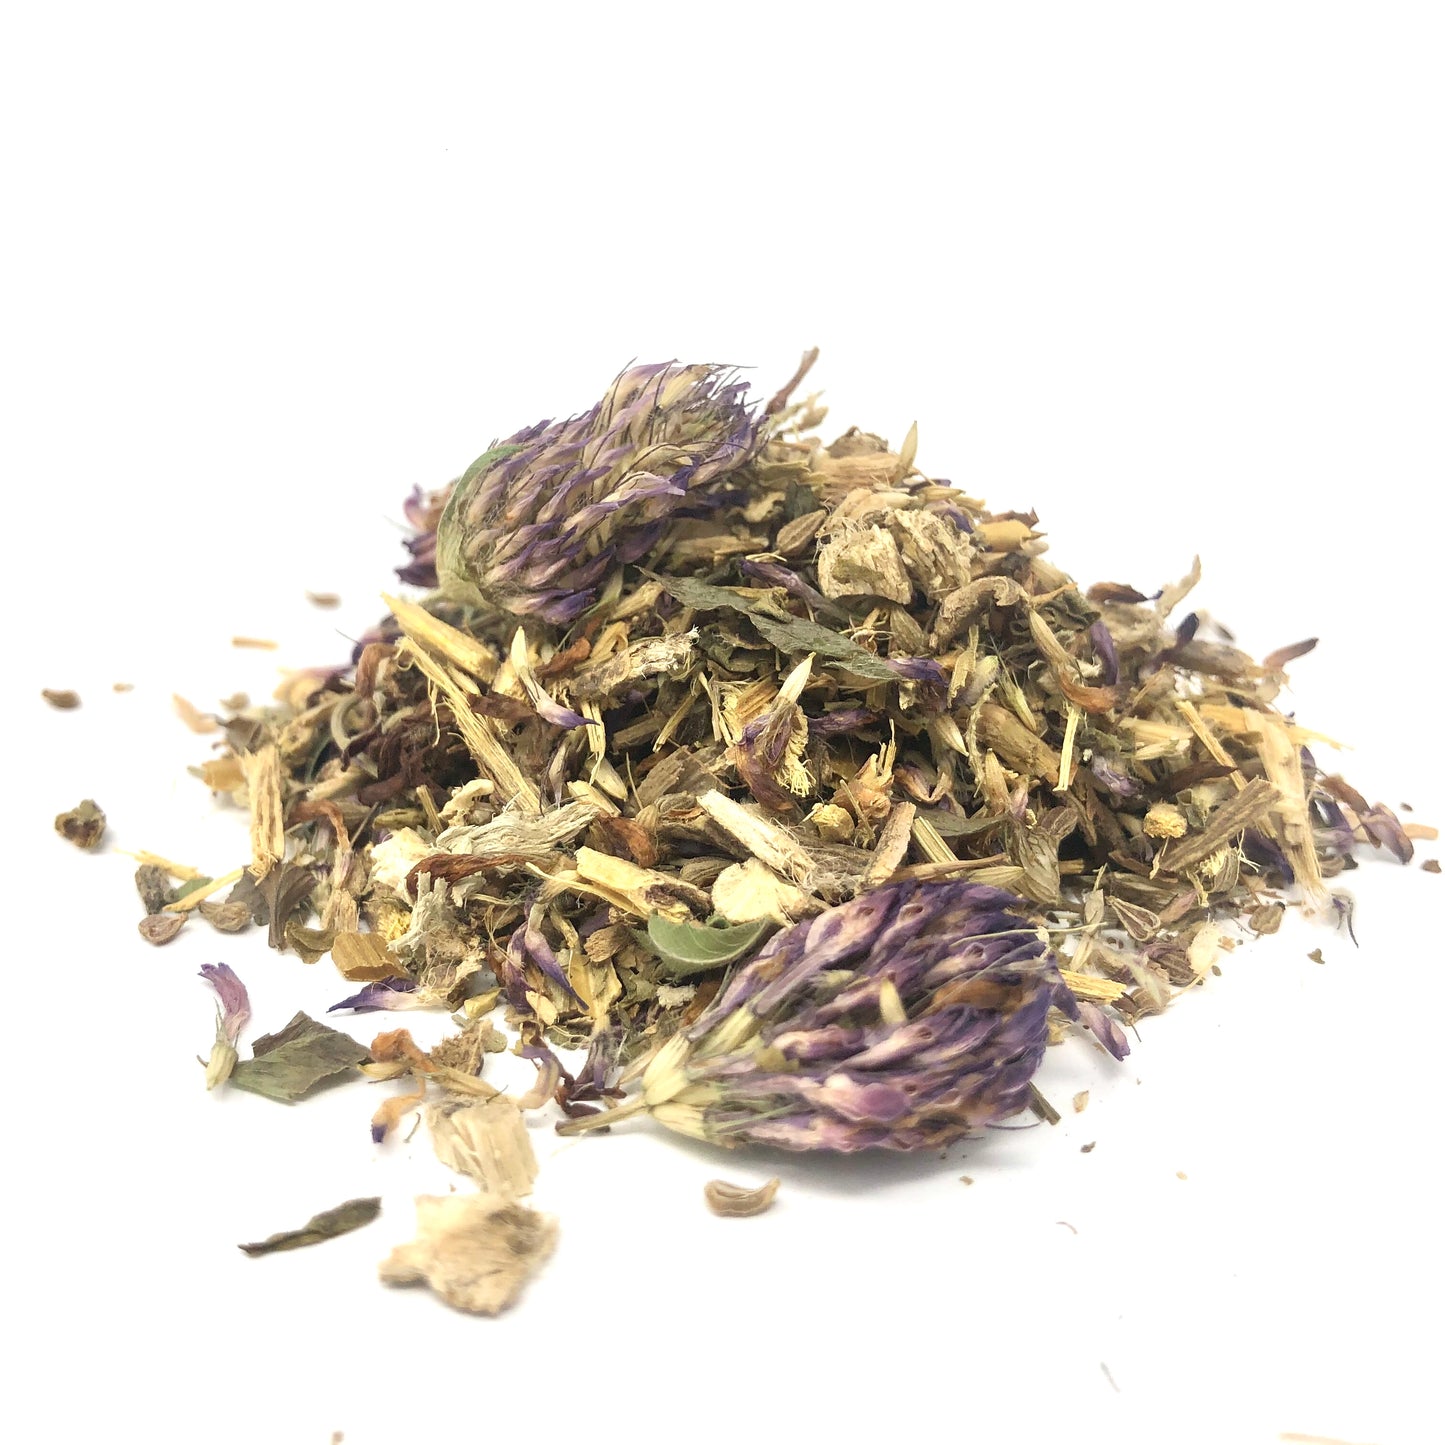 Inspire (Herbal Tea for Congestion and Lung Support)